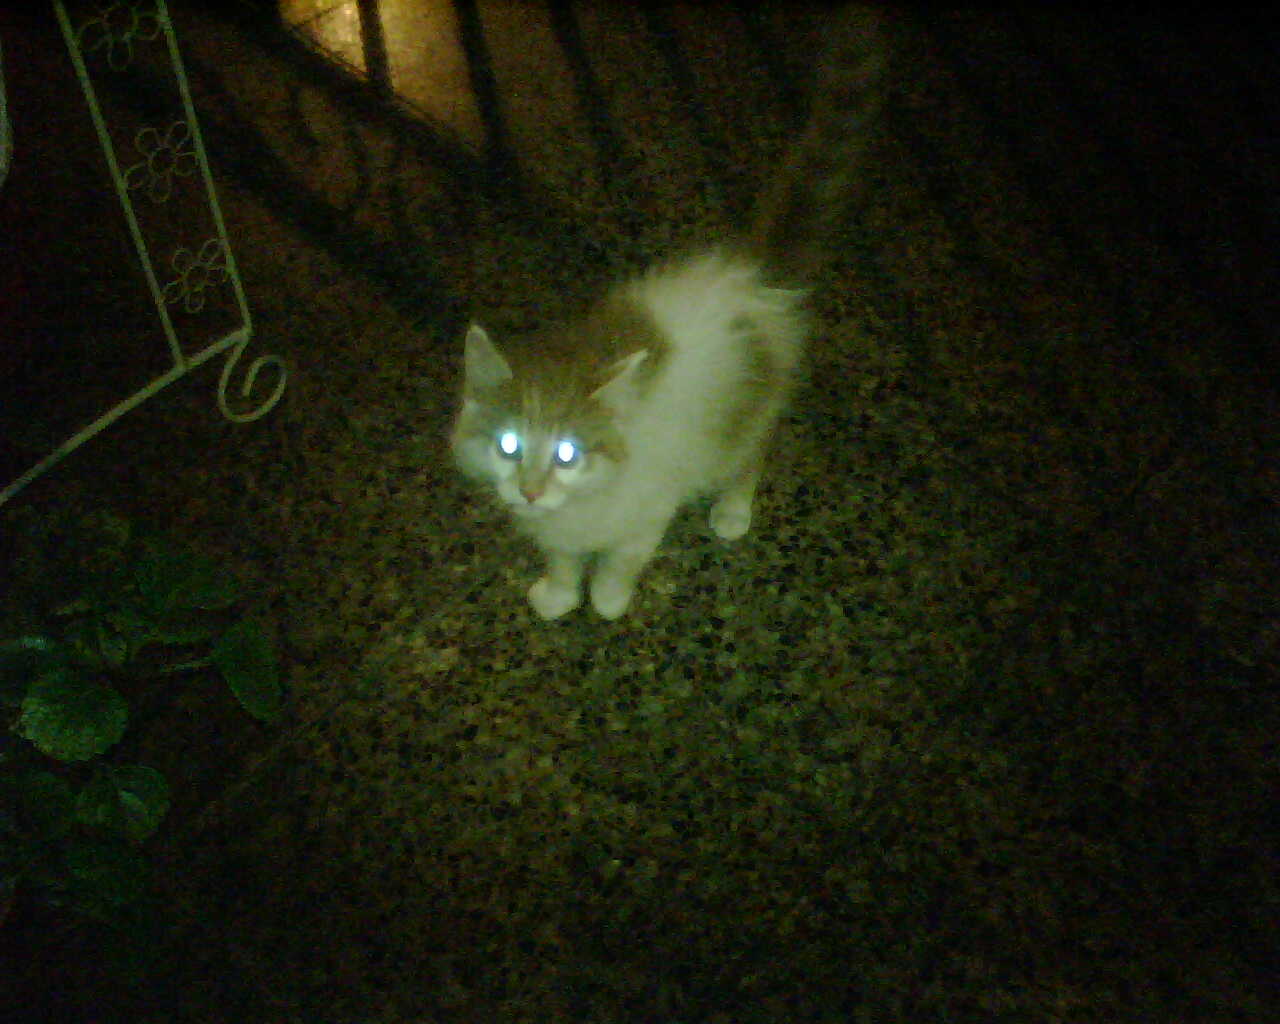 the cat is looking at the camera with green eyes